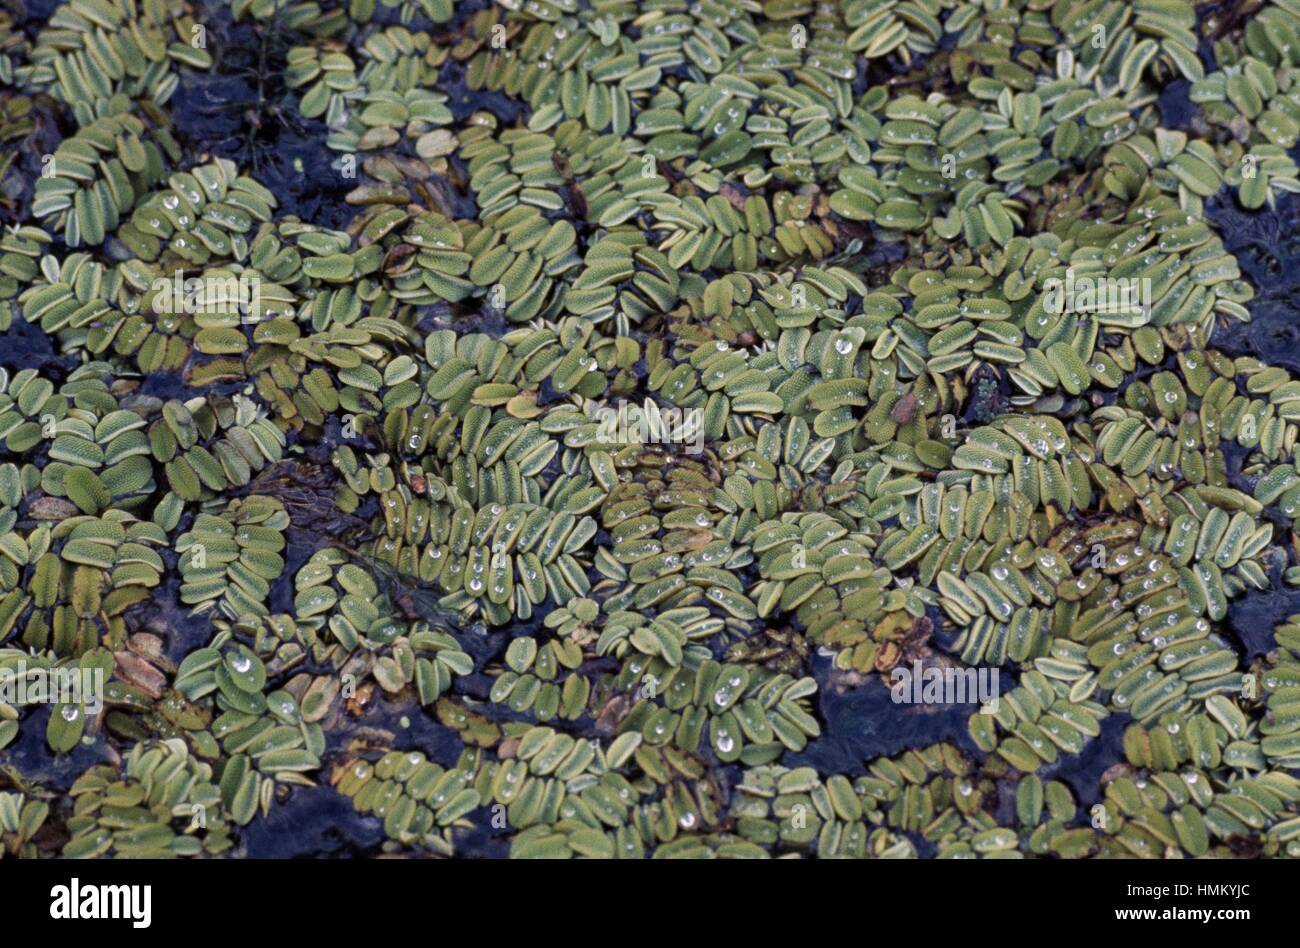 Floating Fern, Floating Watermoss, Floating Moss or Water Butterfly Wings (Salvinia natans), Salviniaceae. Stock Photo